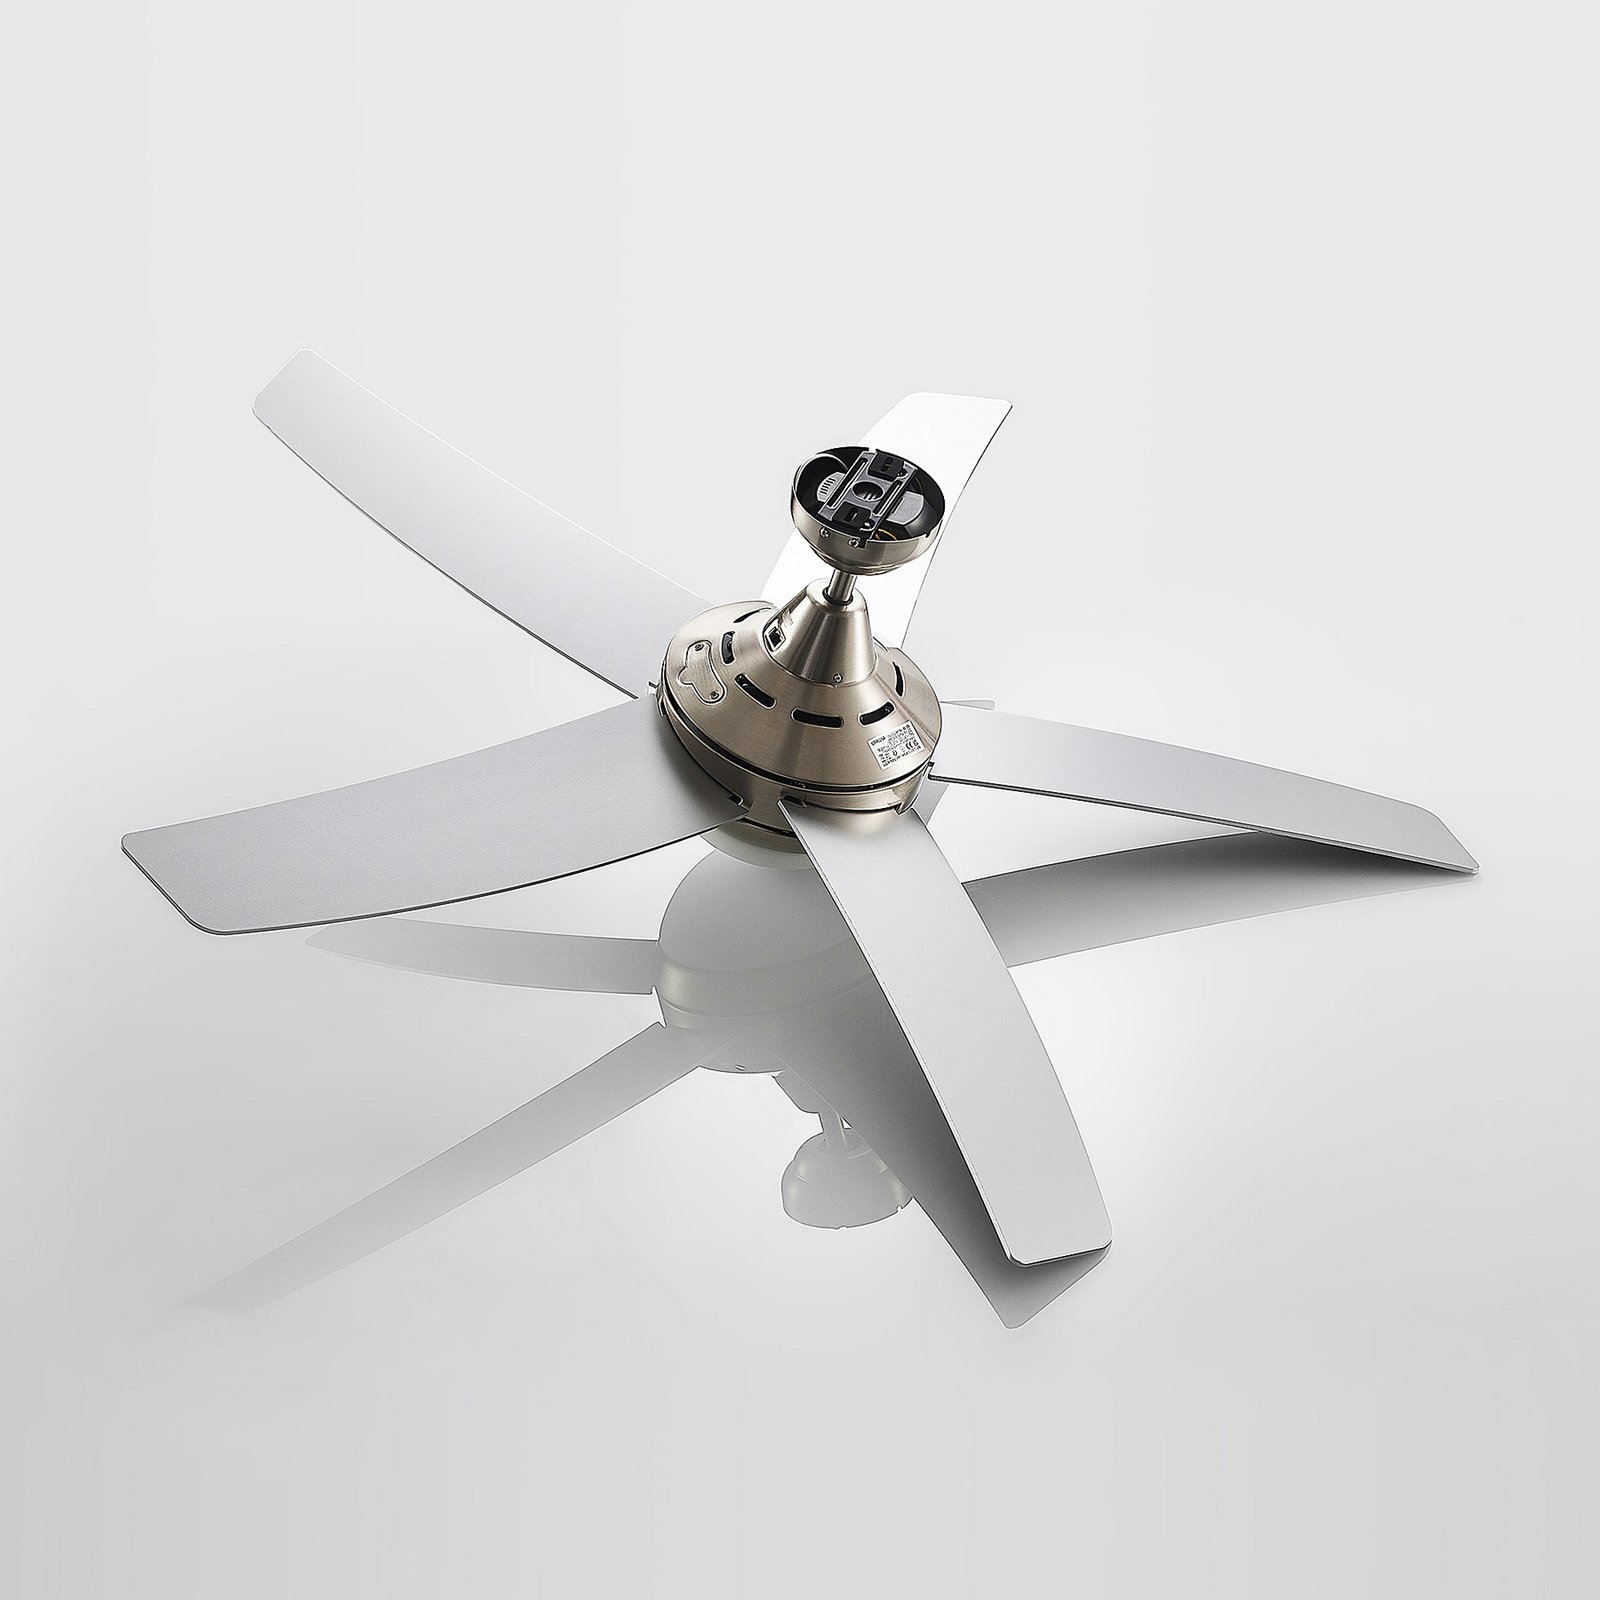 Lindby ceiling fan with light Auraya, quiet, steel